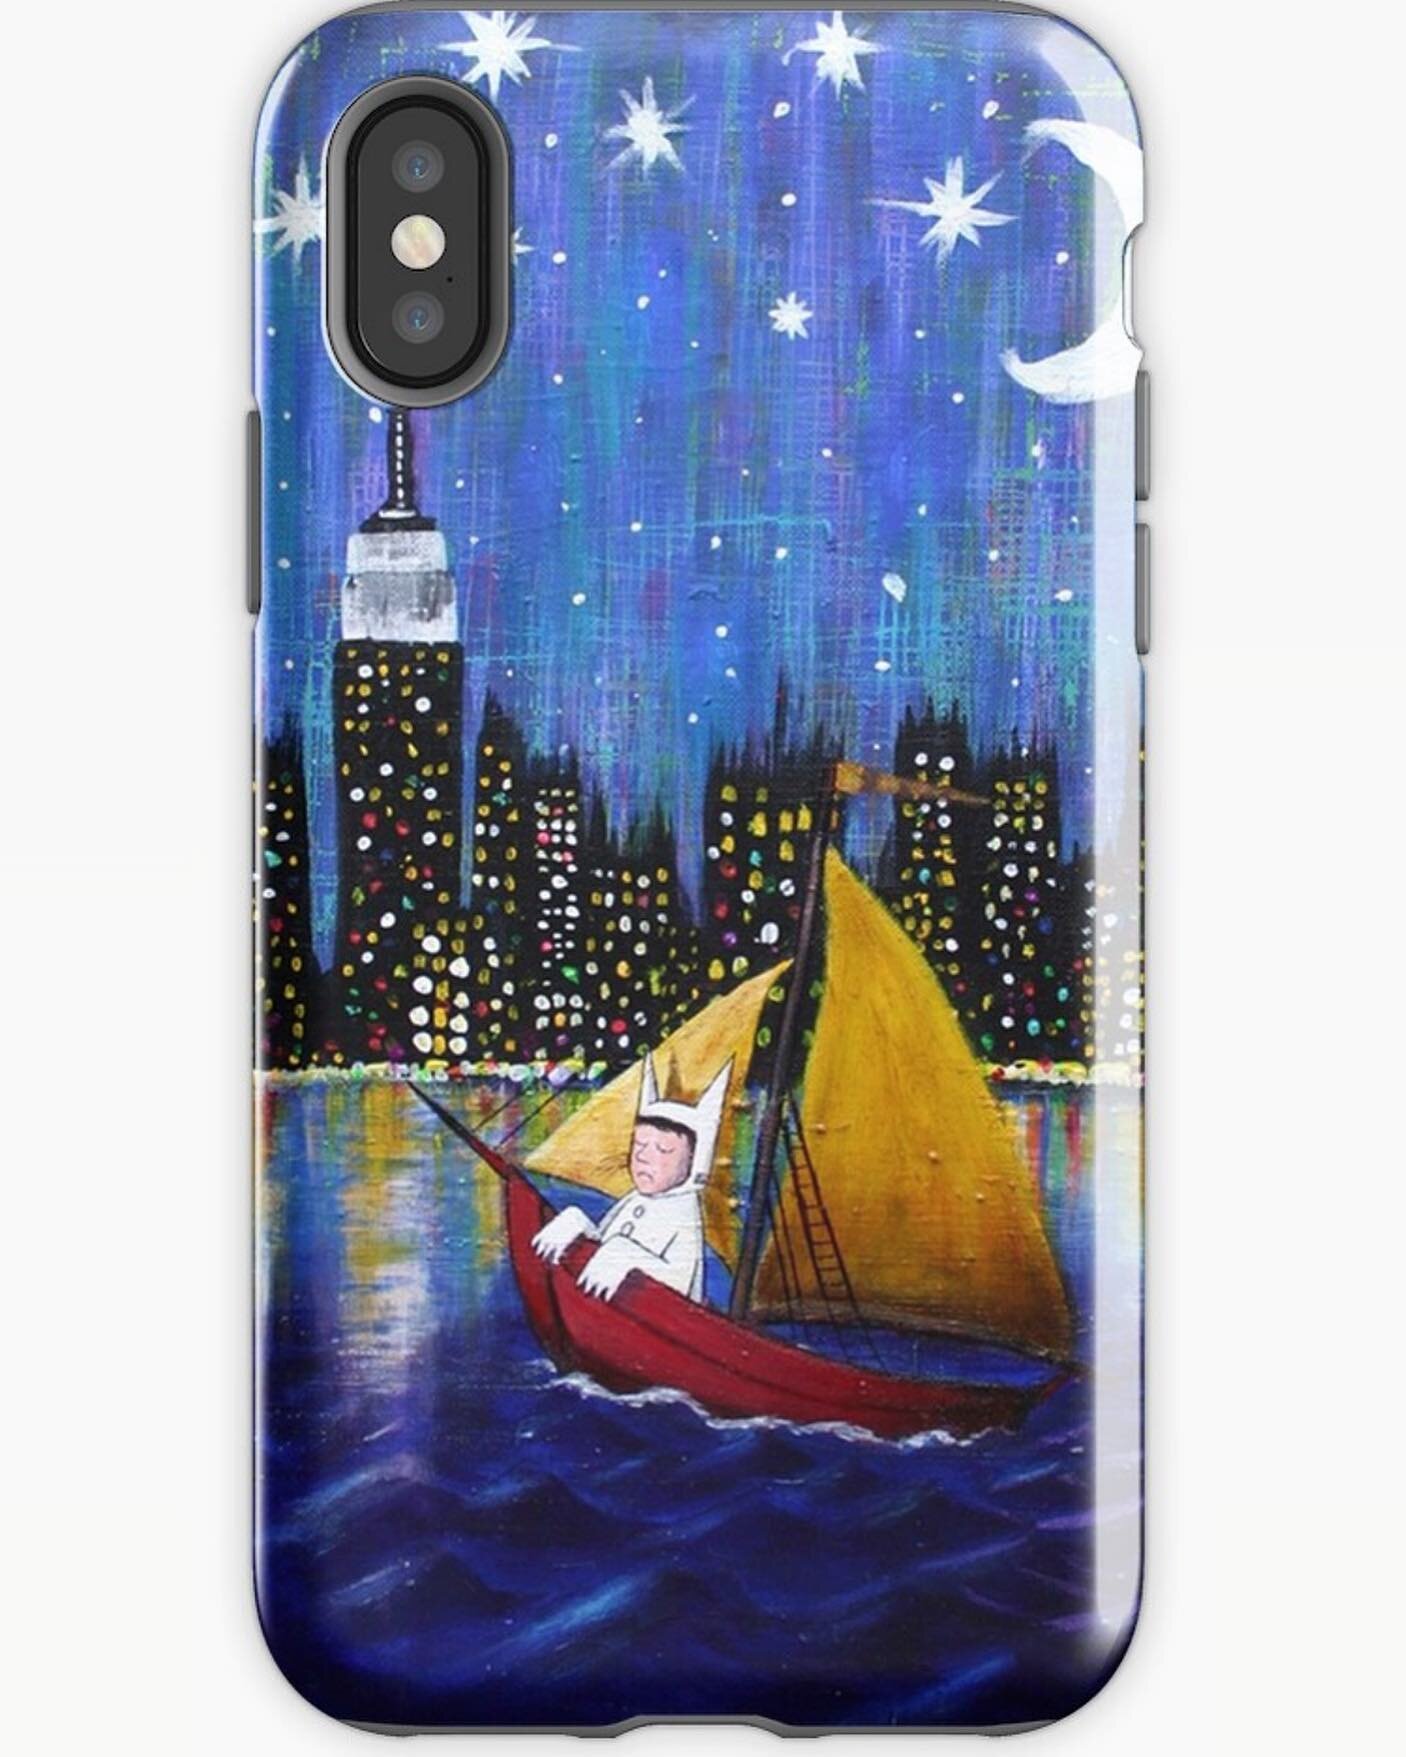 Check out some iPhone cases for sale #design #wherethewildthingsare #nyc #artnyc #phonecases #phonecasesforsale #phonecasesdesigns #max #manhattan #nostalgia #childhood #redbubble #redbubbleartist - https://www.redbubble.com/people/sebs43/shop?utm_so